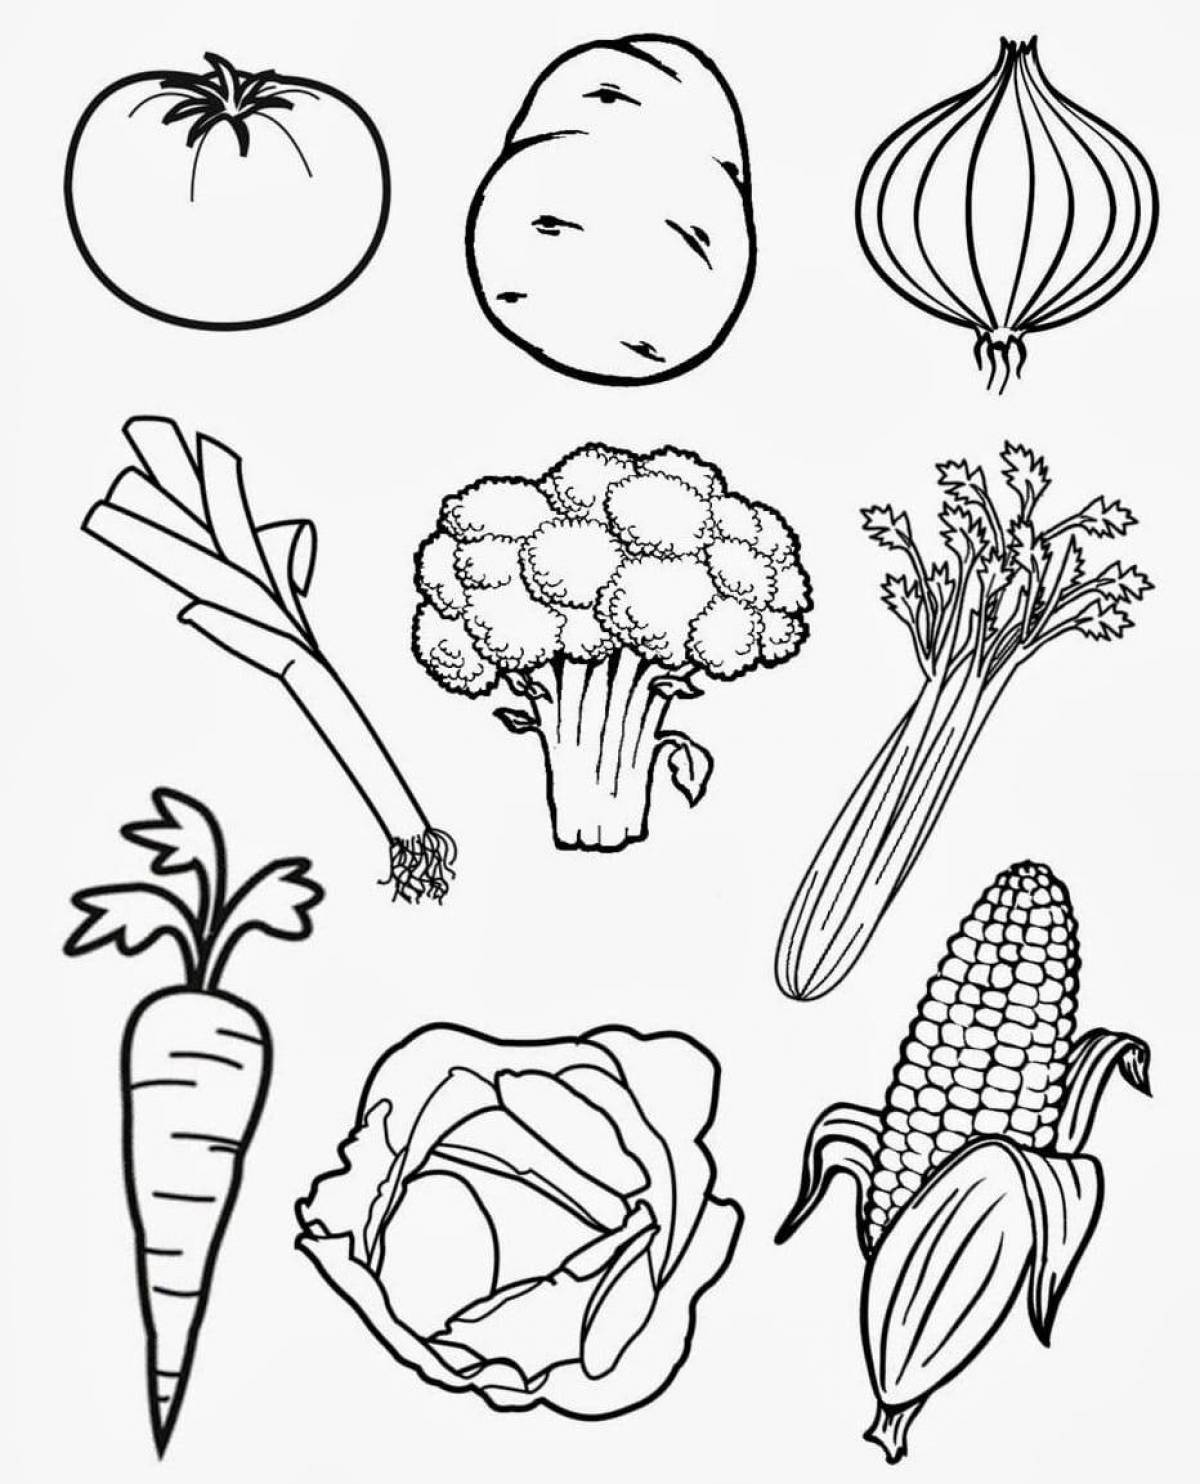 Gourmet fruits and vegetables coloring pages for kids